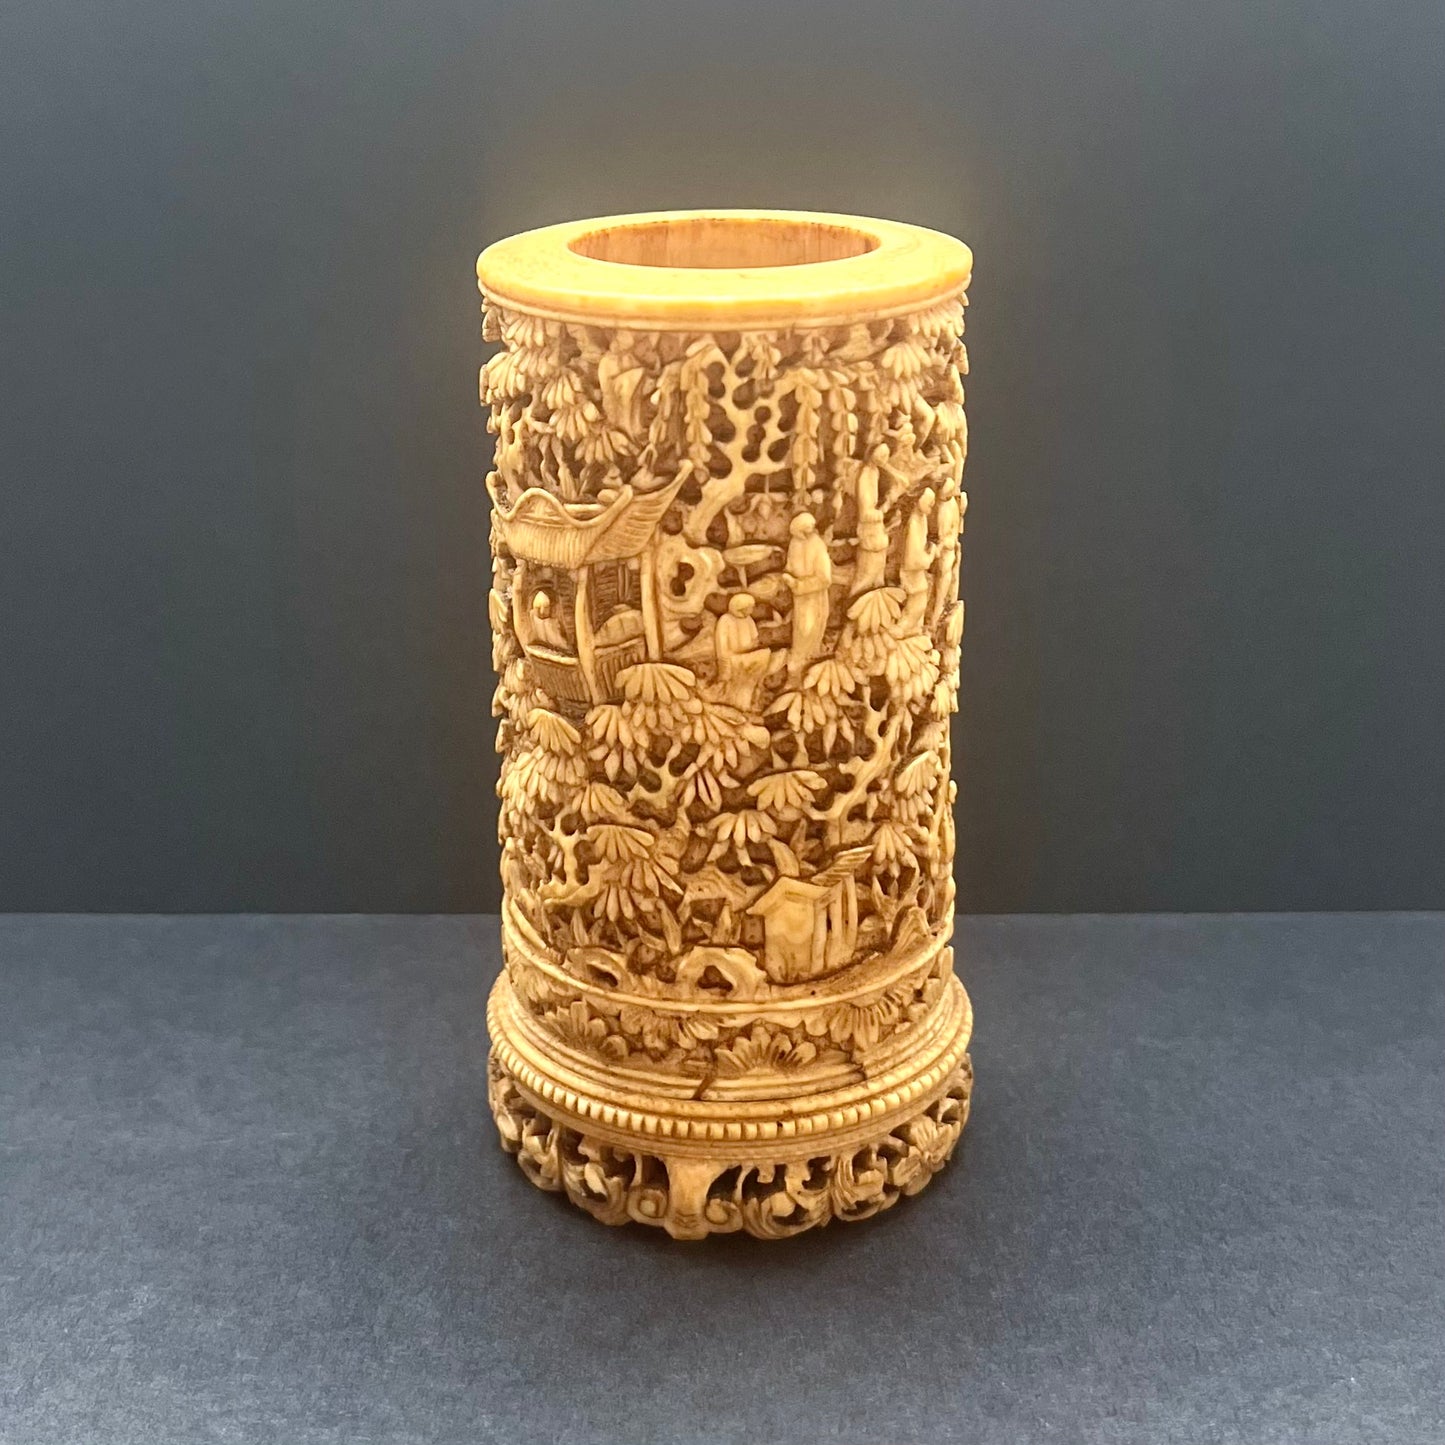 Exceptional late 18th to mid 19th century Qing Dynasty Chinese ivory brush holder with finely carved pavilion scenes